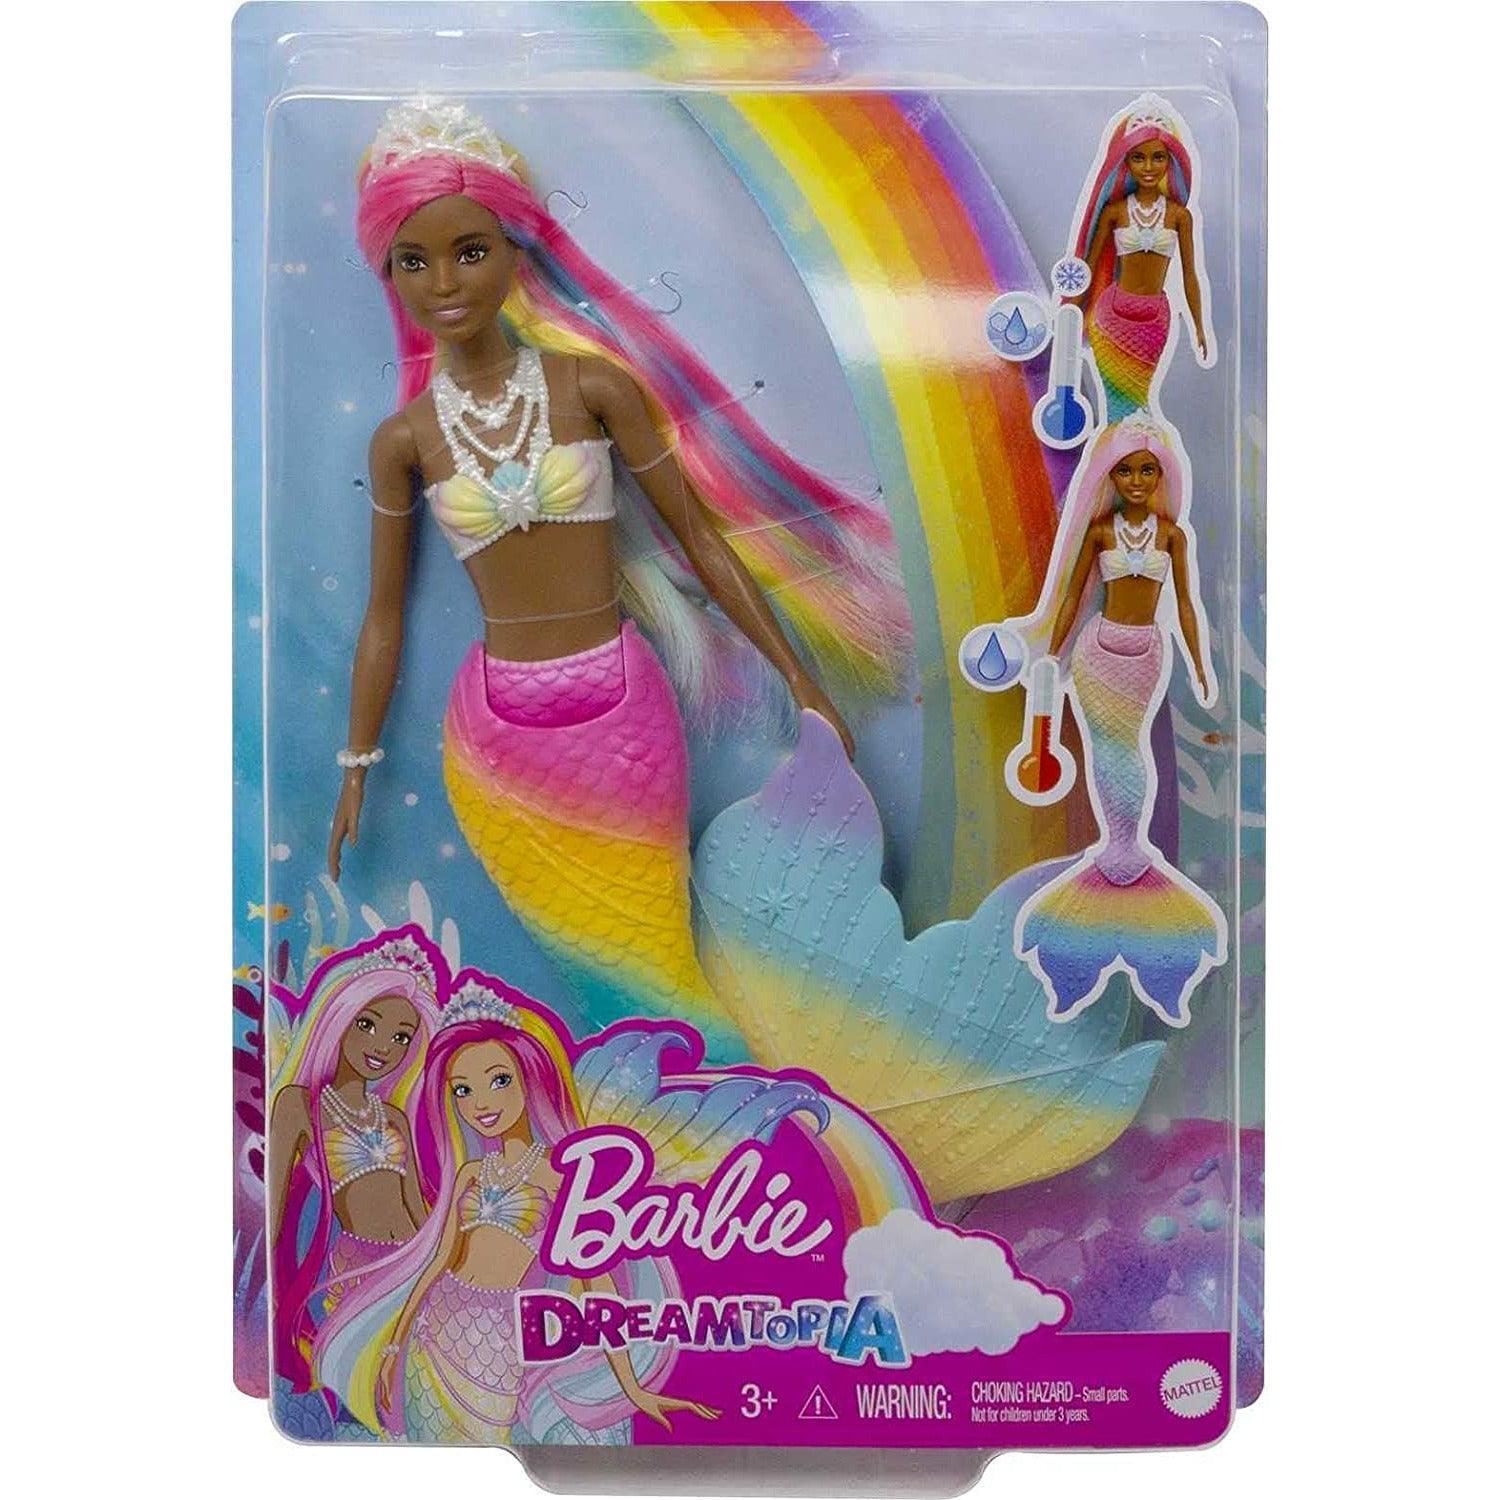 Barbie Dreamtopia Rainbow Magic Mermaid Doll with Rainbow Hair and Water-Activated Color Change Feature - BumbleToys - 5-7 Years, Barbie, Fashion Dolls & Accessories, Girls, Mermaid, Pre-Order